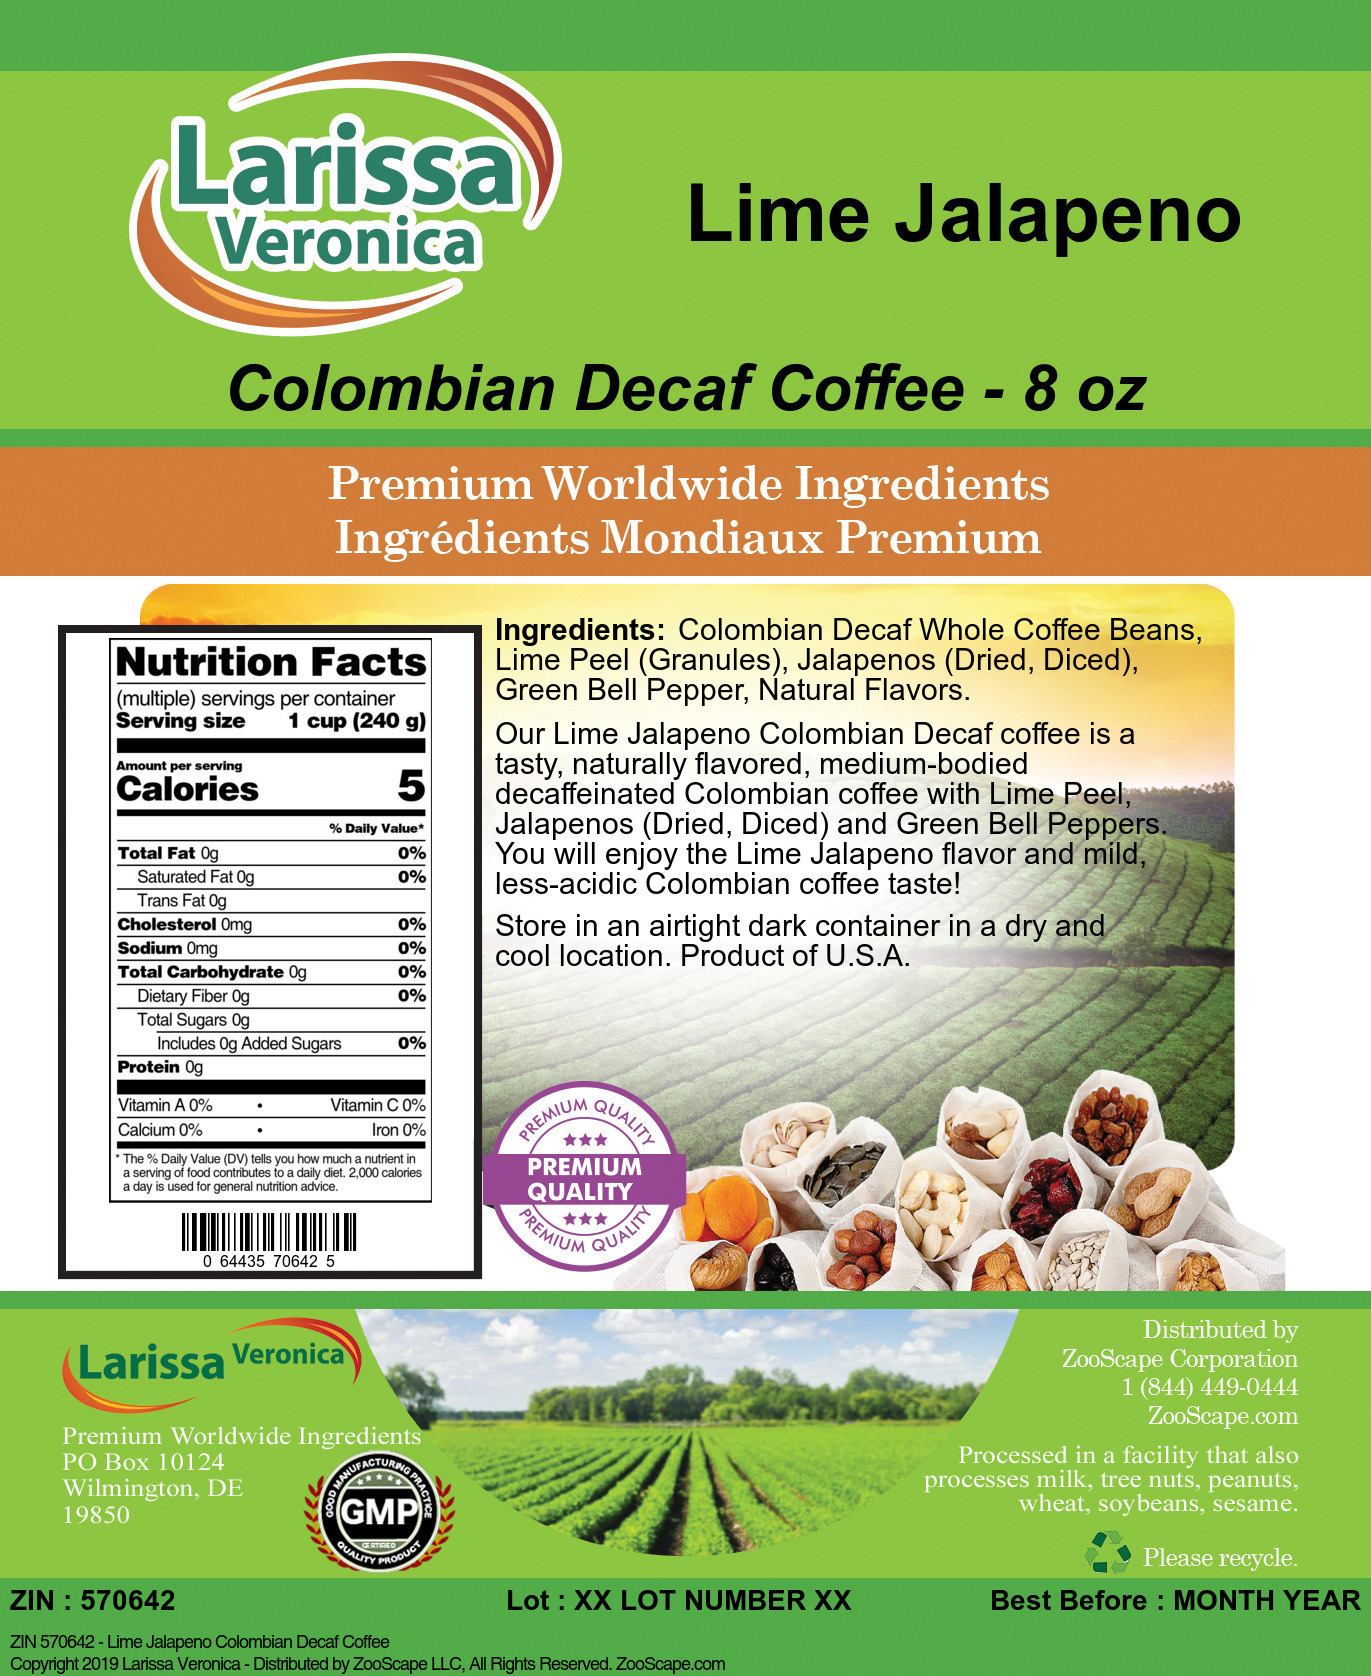 Lime Jalapeno Colombian Decaf Coffee - Label